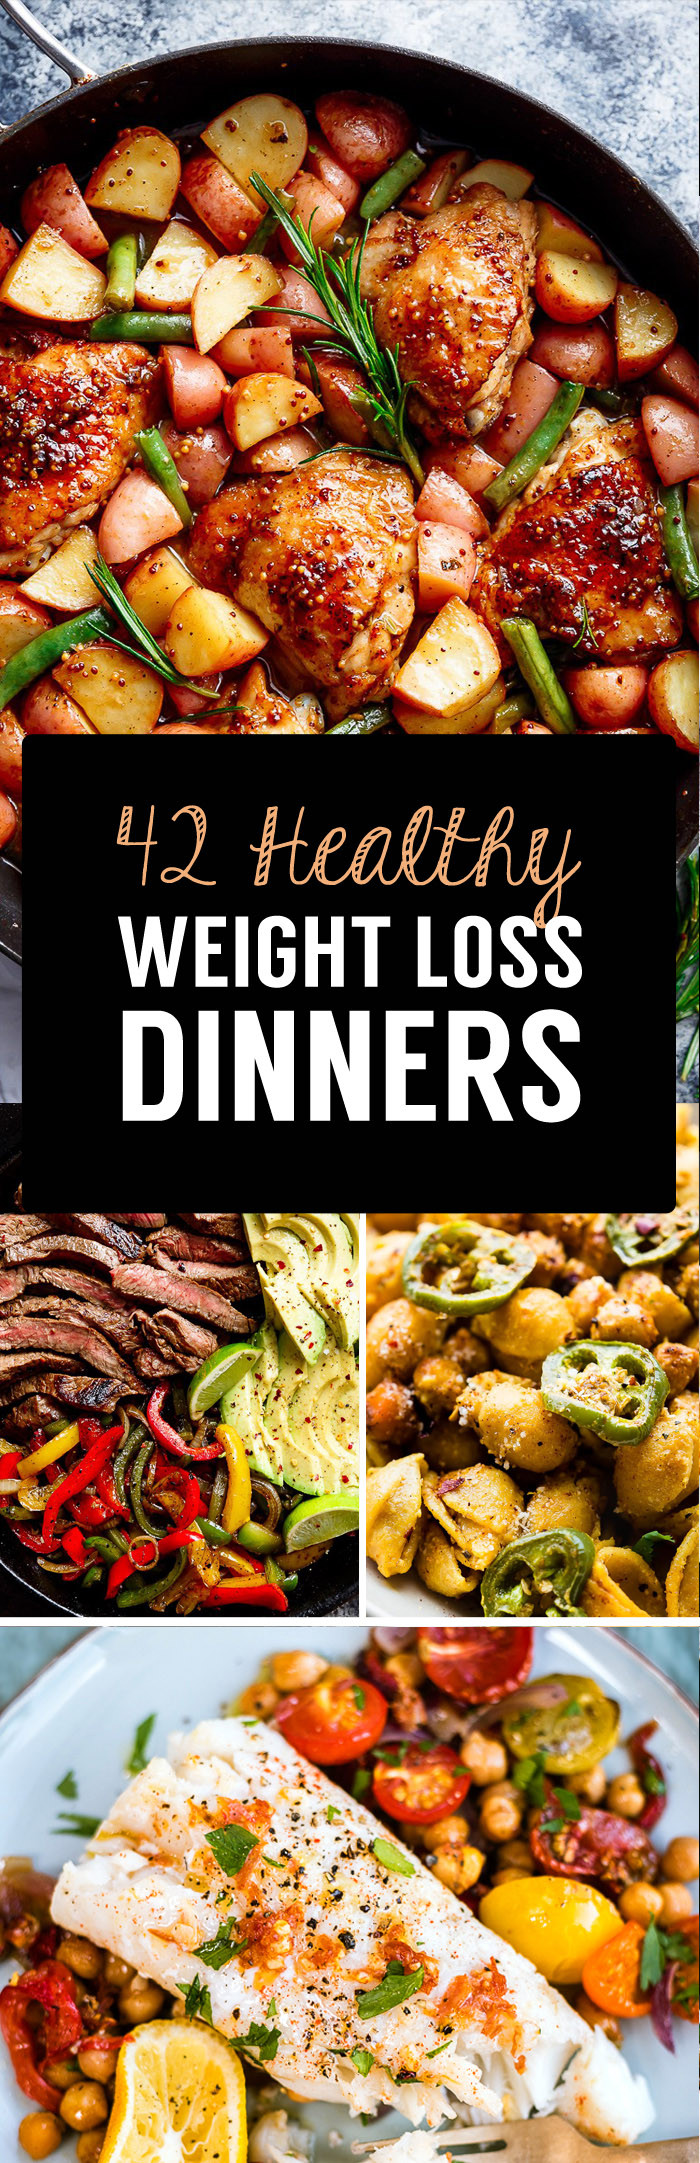 Healthy Dinner Recipes For Weight Loss
 42 Weight Loss Dinner Recipes That Will Help You Shrink